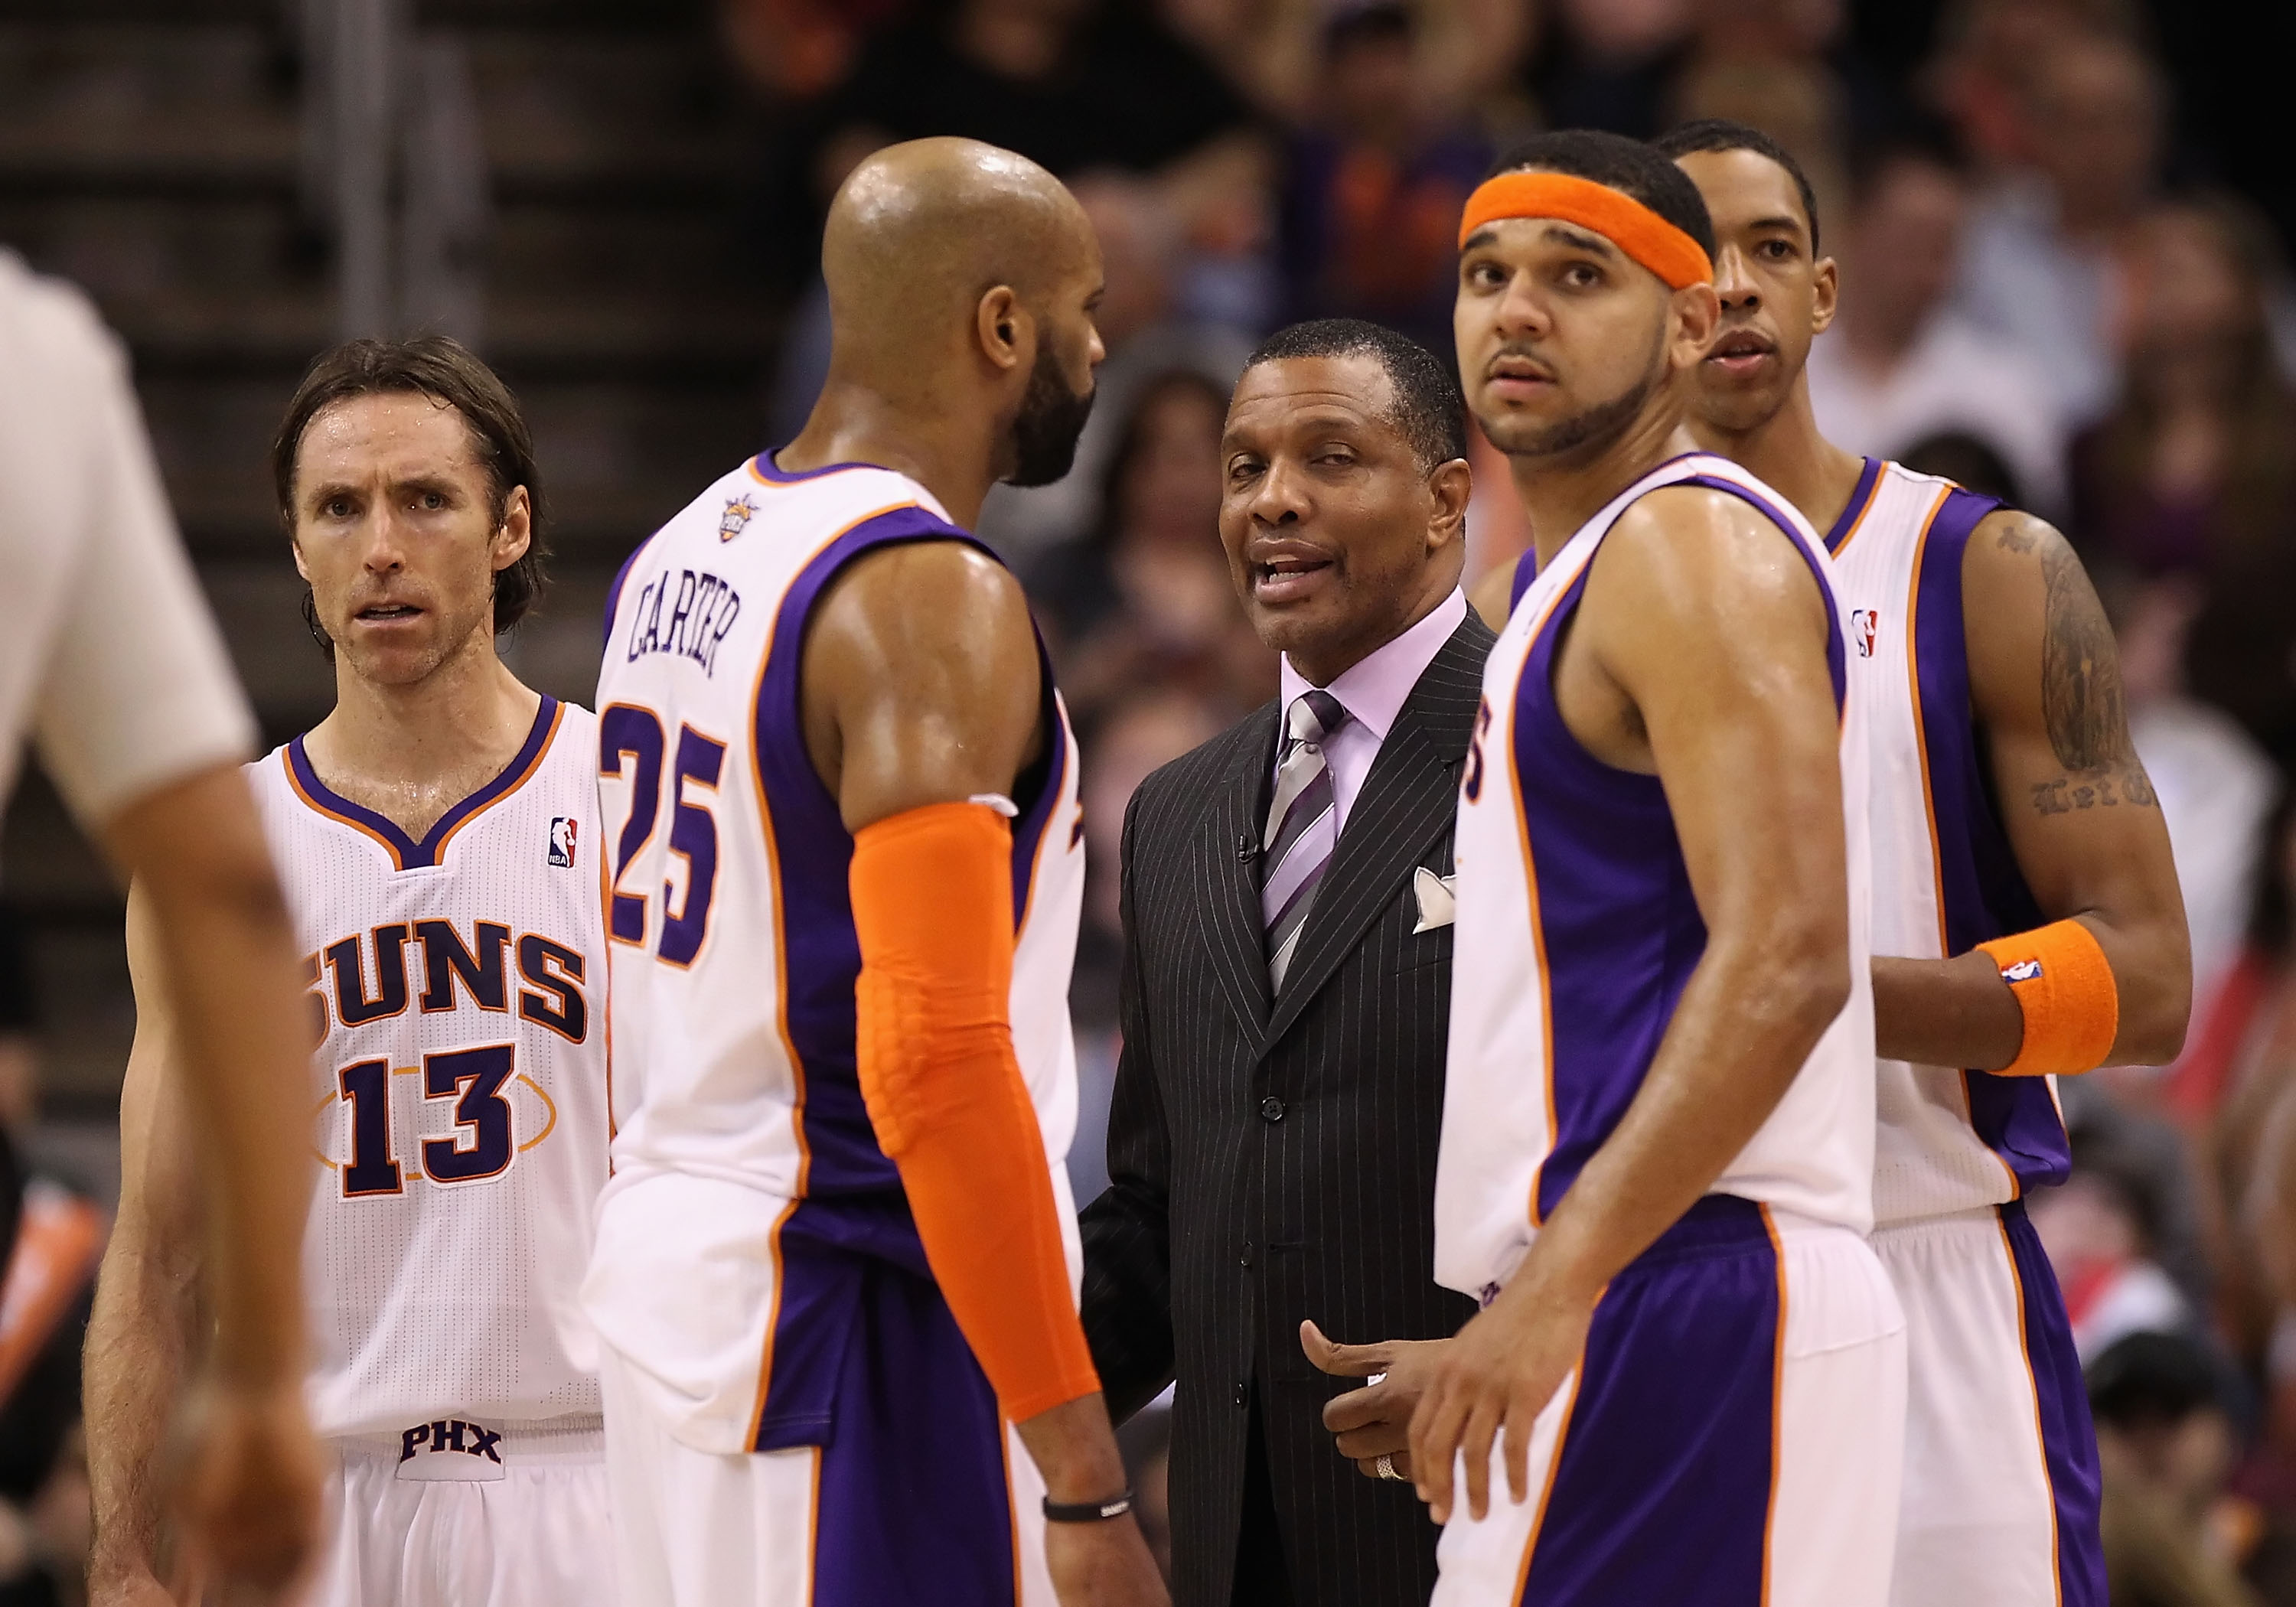 PHOENIX - JANUARY 07:  Head coach Alvin Gentry of the Phoenix Suns talks with Steve Nash #12, Vince Carter #25, Goran Dragic #2 and Channing Frye #8 during the NBA game against the New York Knicks at US Airways Center on January 7, 2011 in Phoenix, Arizon